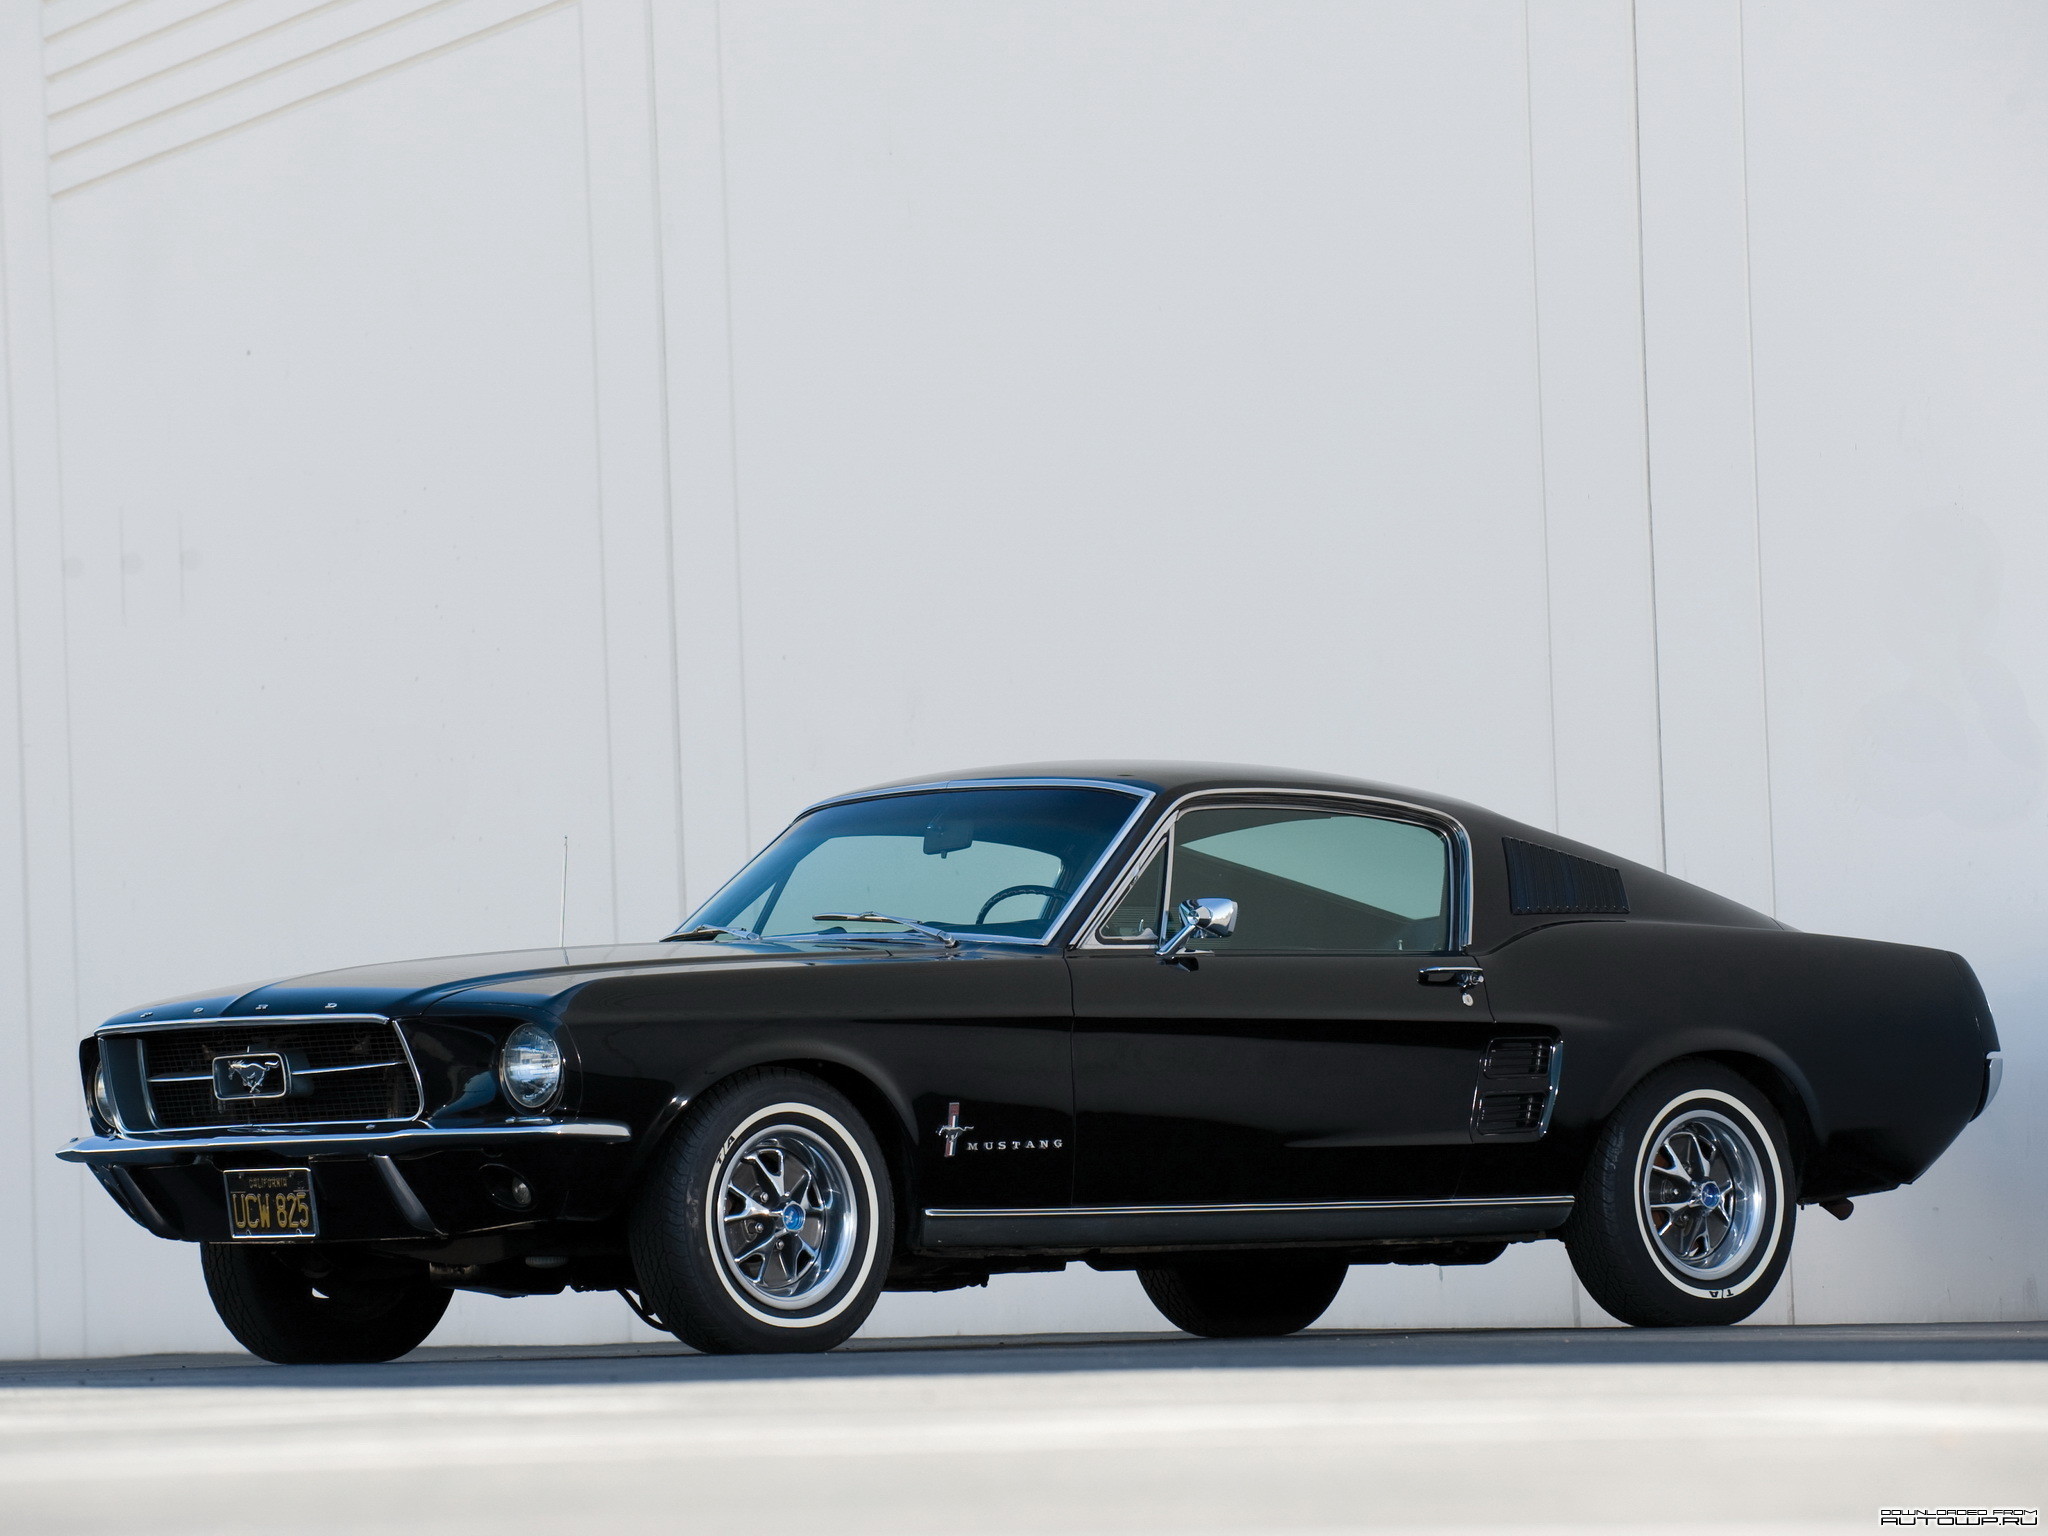 2048x1536 Resize Crop It In Available Screen Resolutions 1967 Ford Mustang Shelby  Gt350 Widescreen Wallpaper